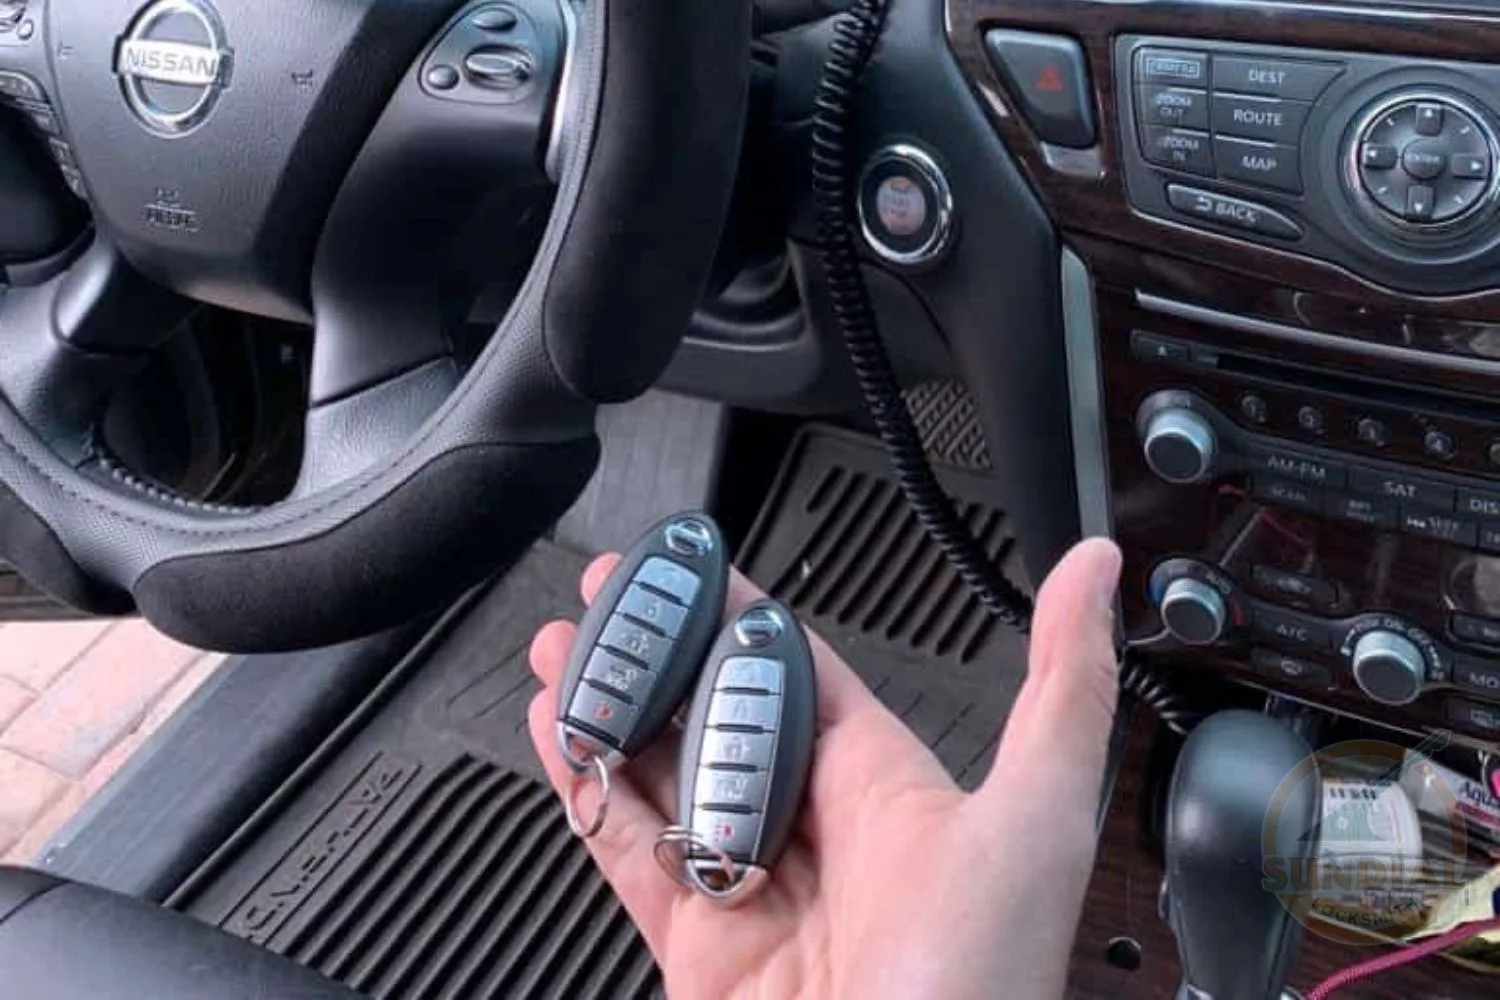 Nissan vehicle interior with new key fobs